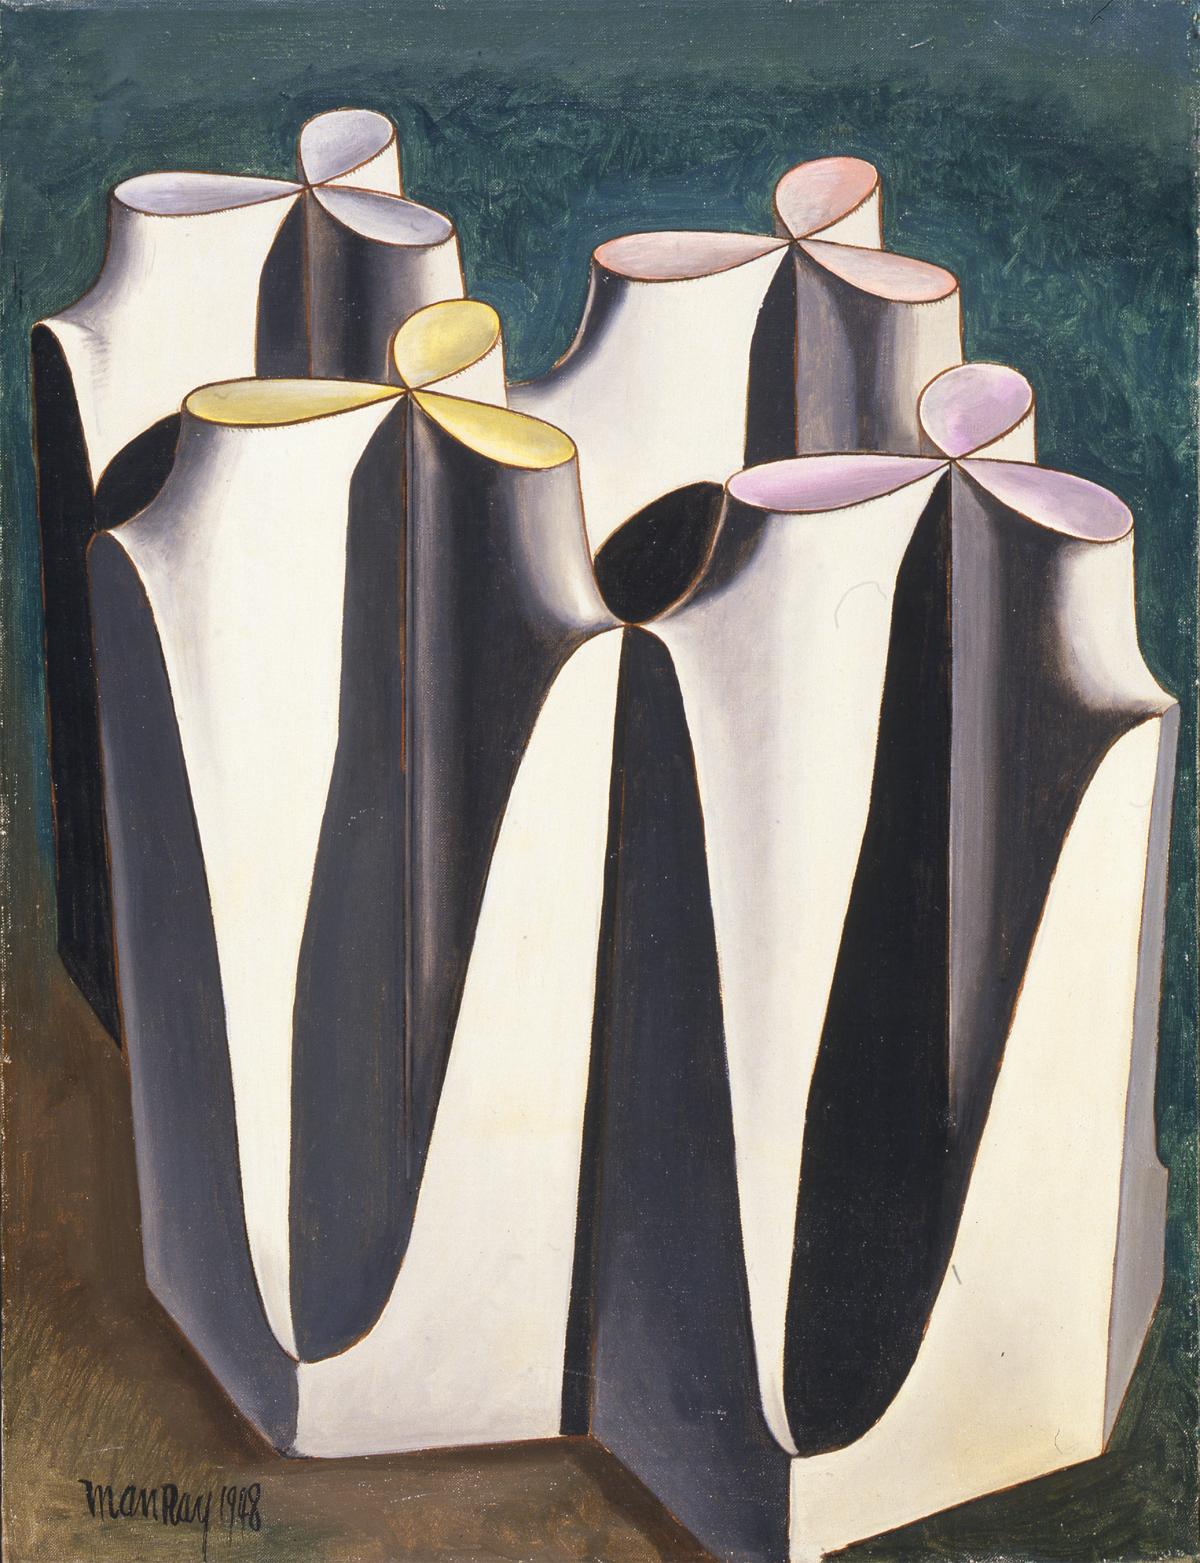 Man Ray's "Merry Wives of Windsor" (1948)